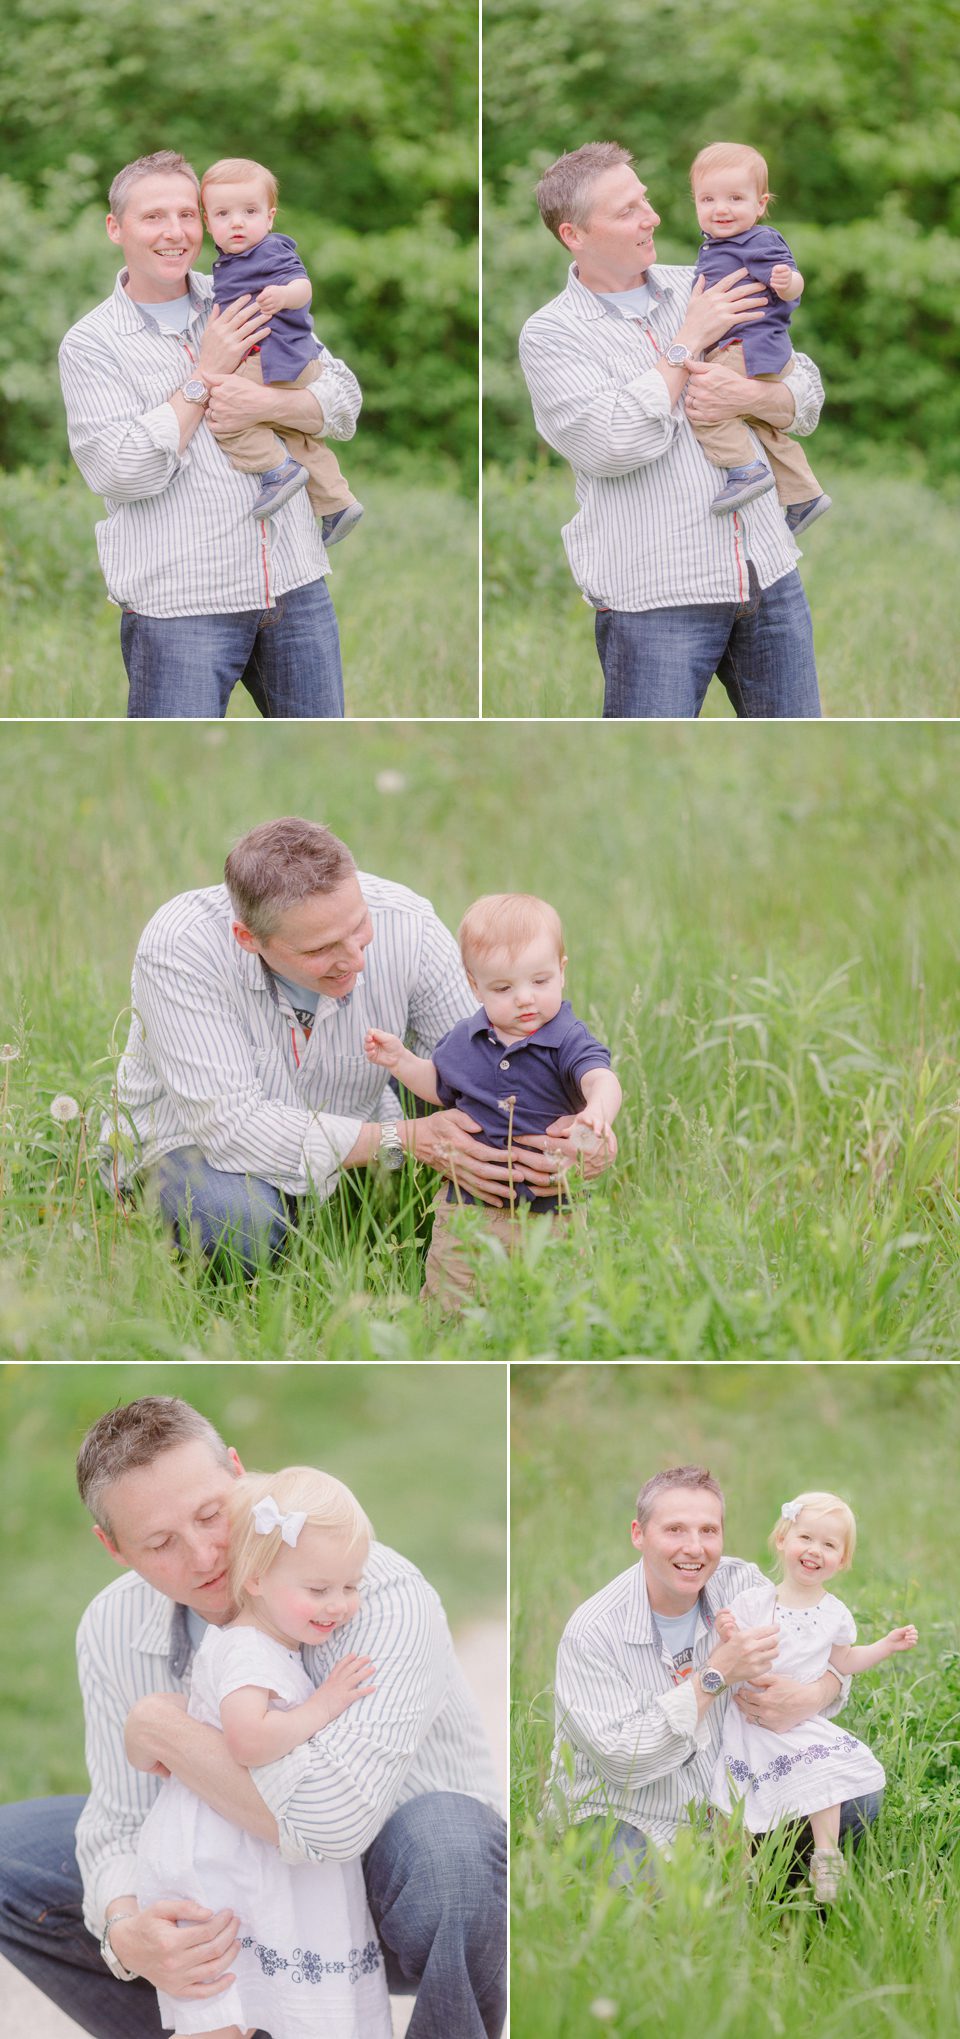 Photos of father with children in a field in Oconee County, Georgia.